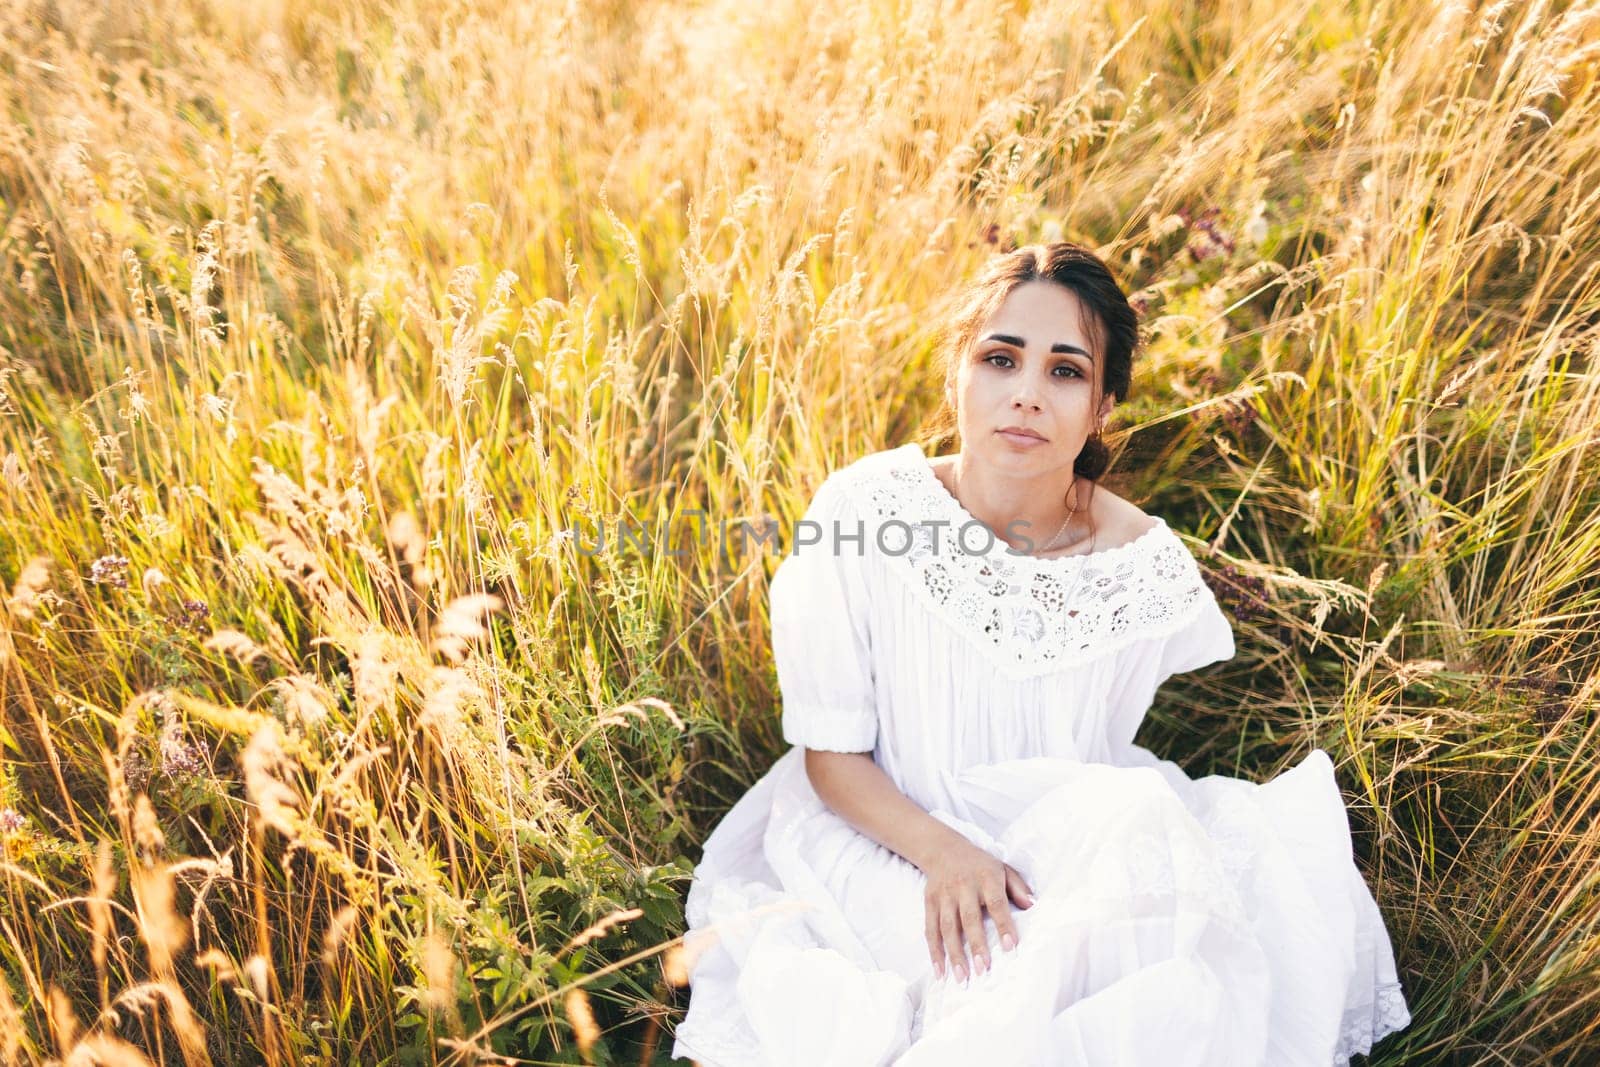 Beautiful girl in white dress sitting in wheat field at sunset